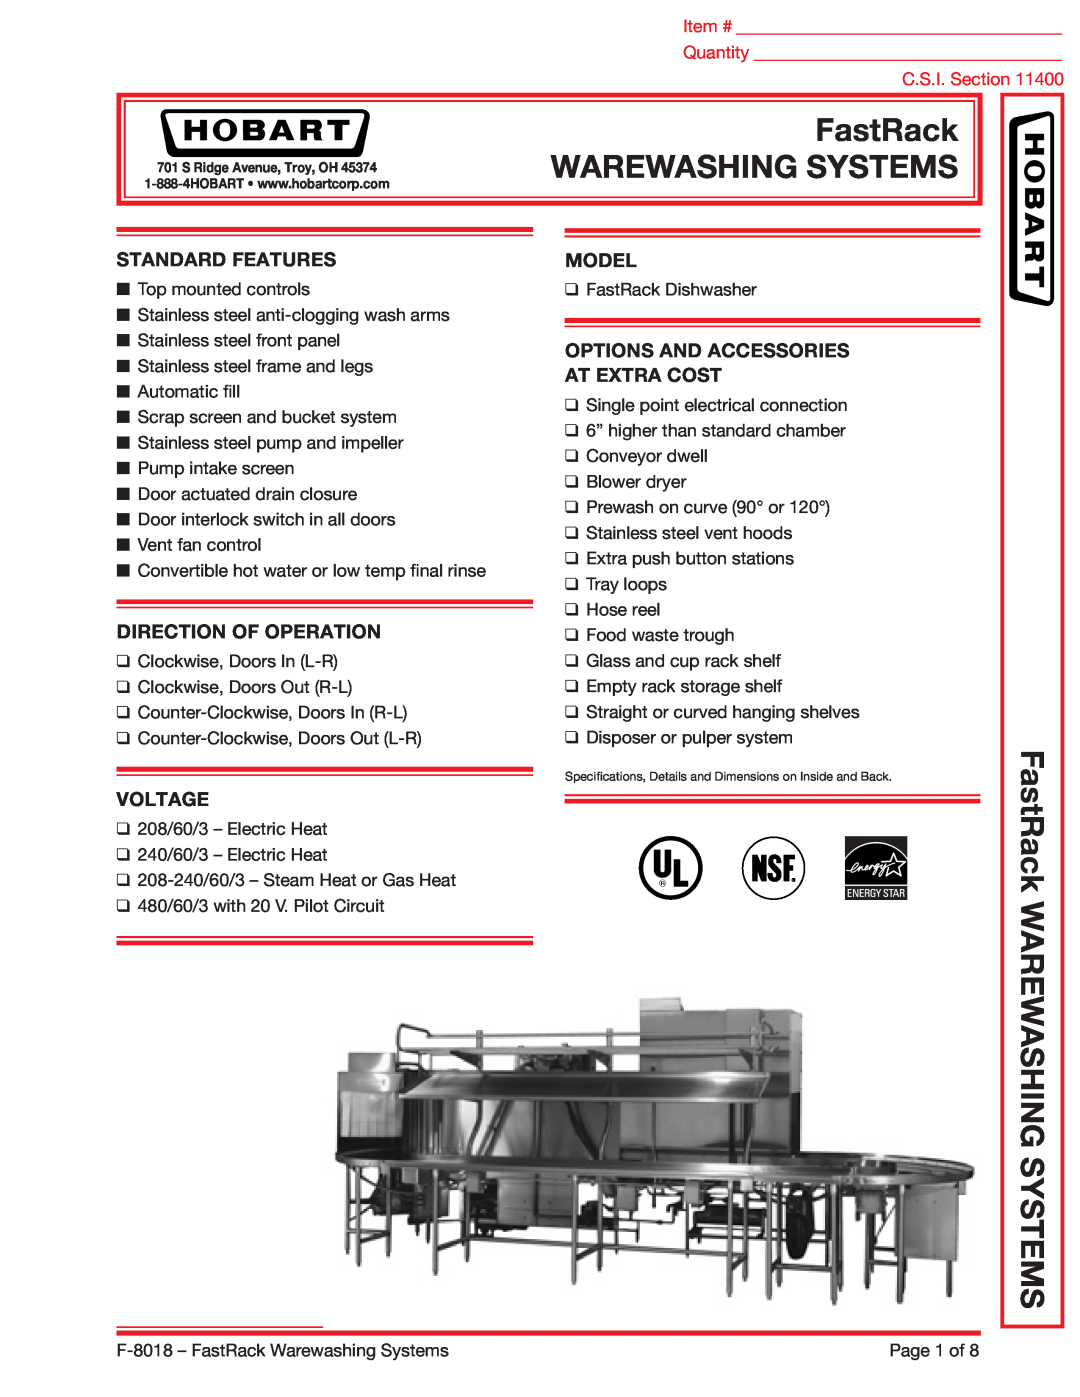 Hobart F-8018 specifications Warewashing Systems, FastRack WAREWASHING SYSTEMS, Standard Features, Model, Voltage 